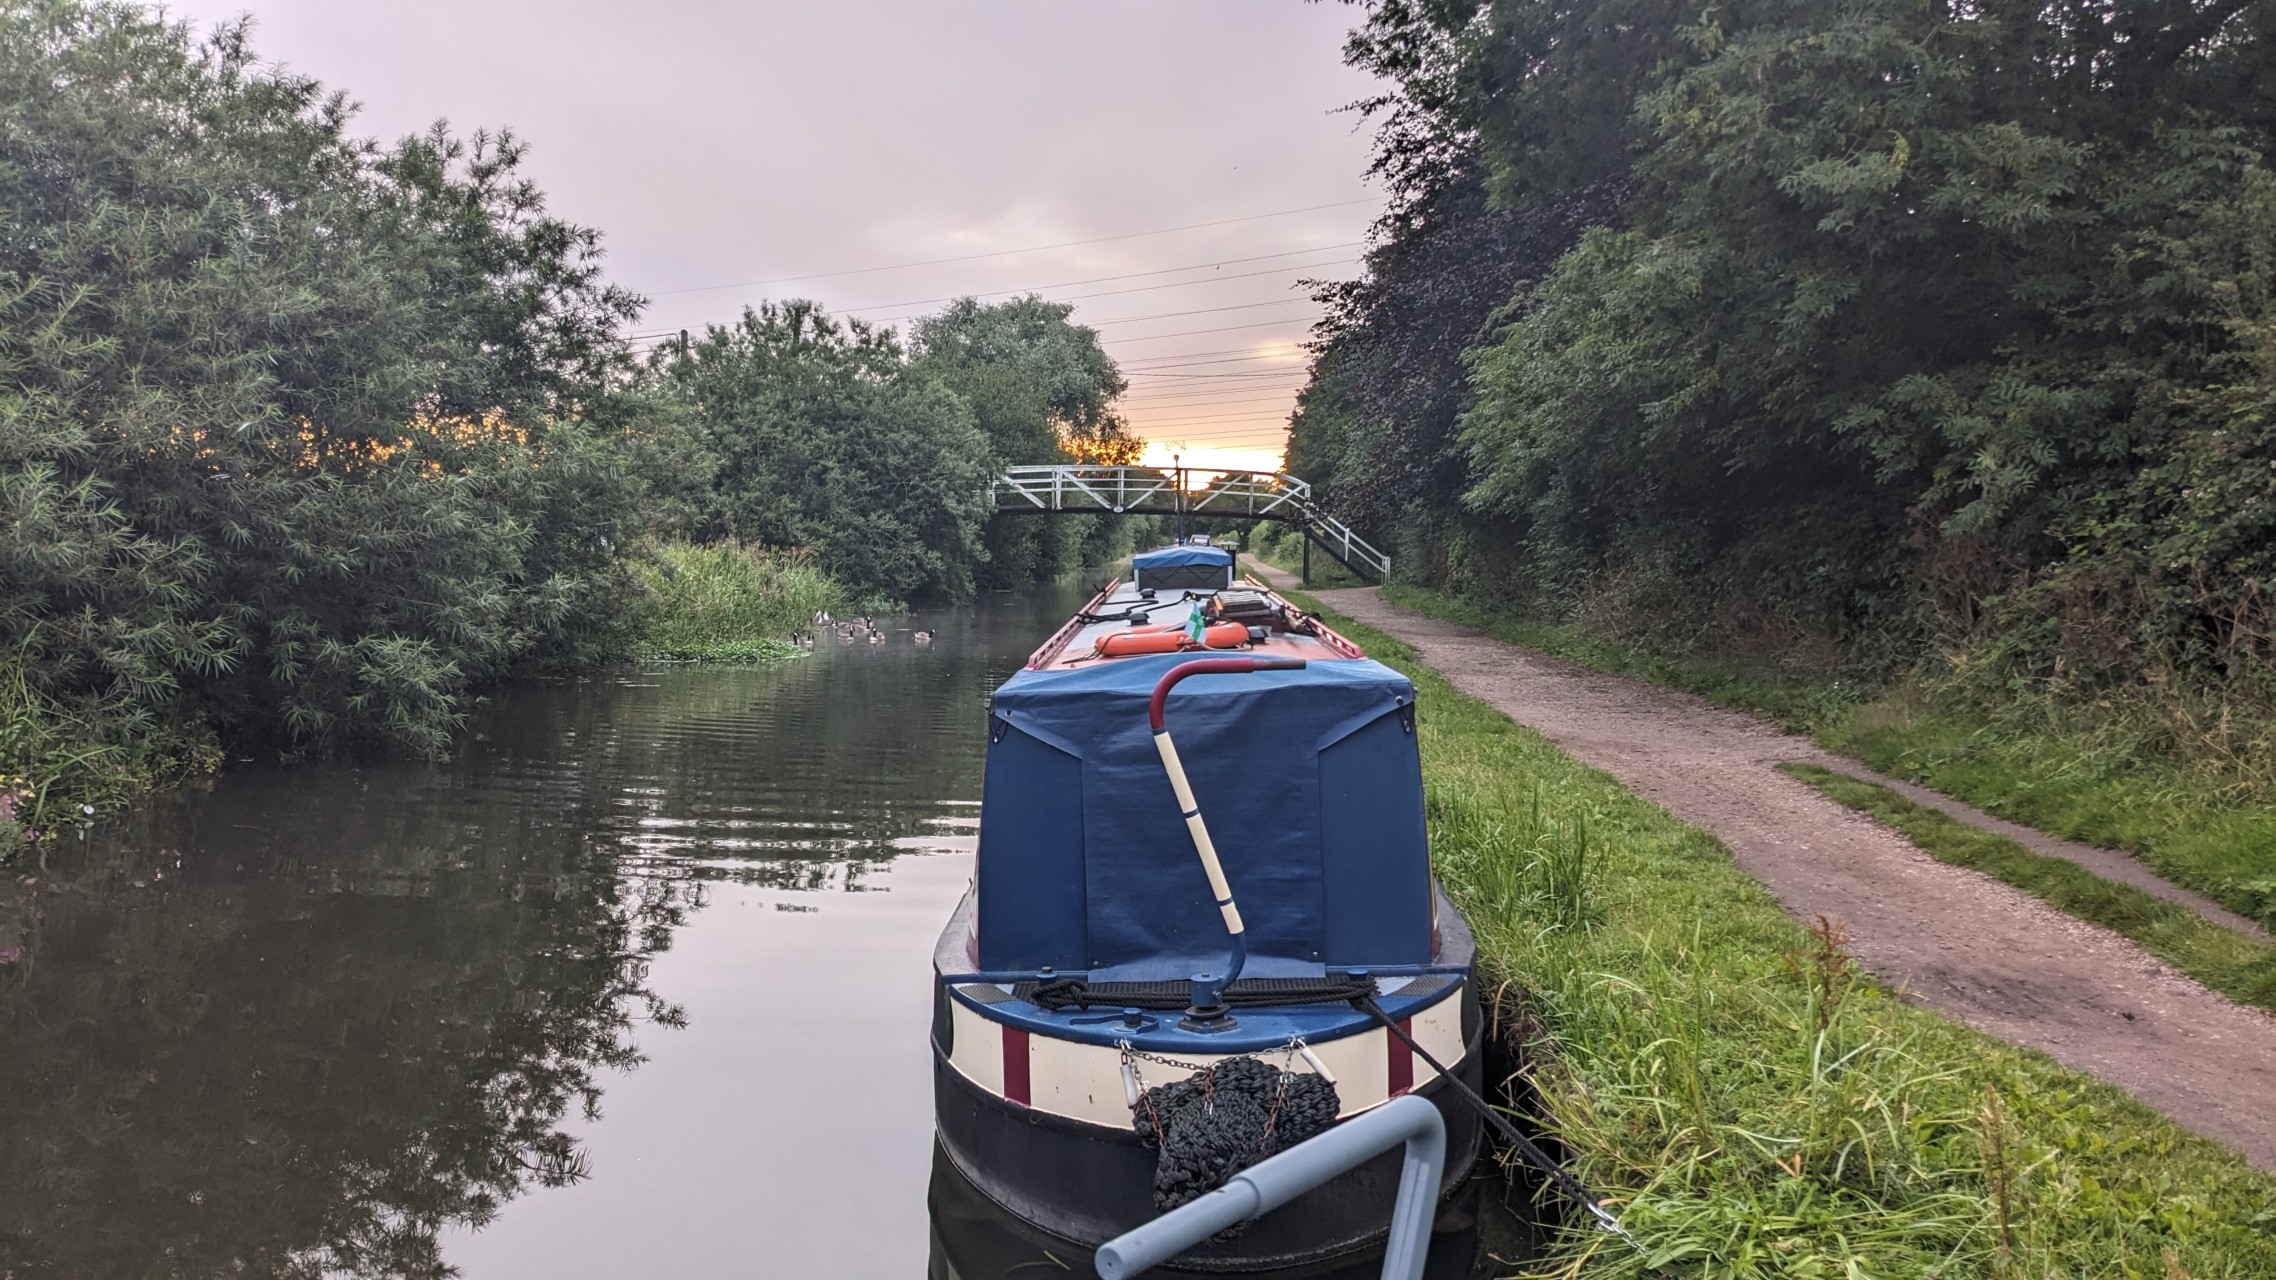 My mooring the previous night, on the Trent and Mersey Canal